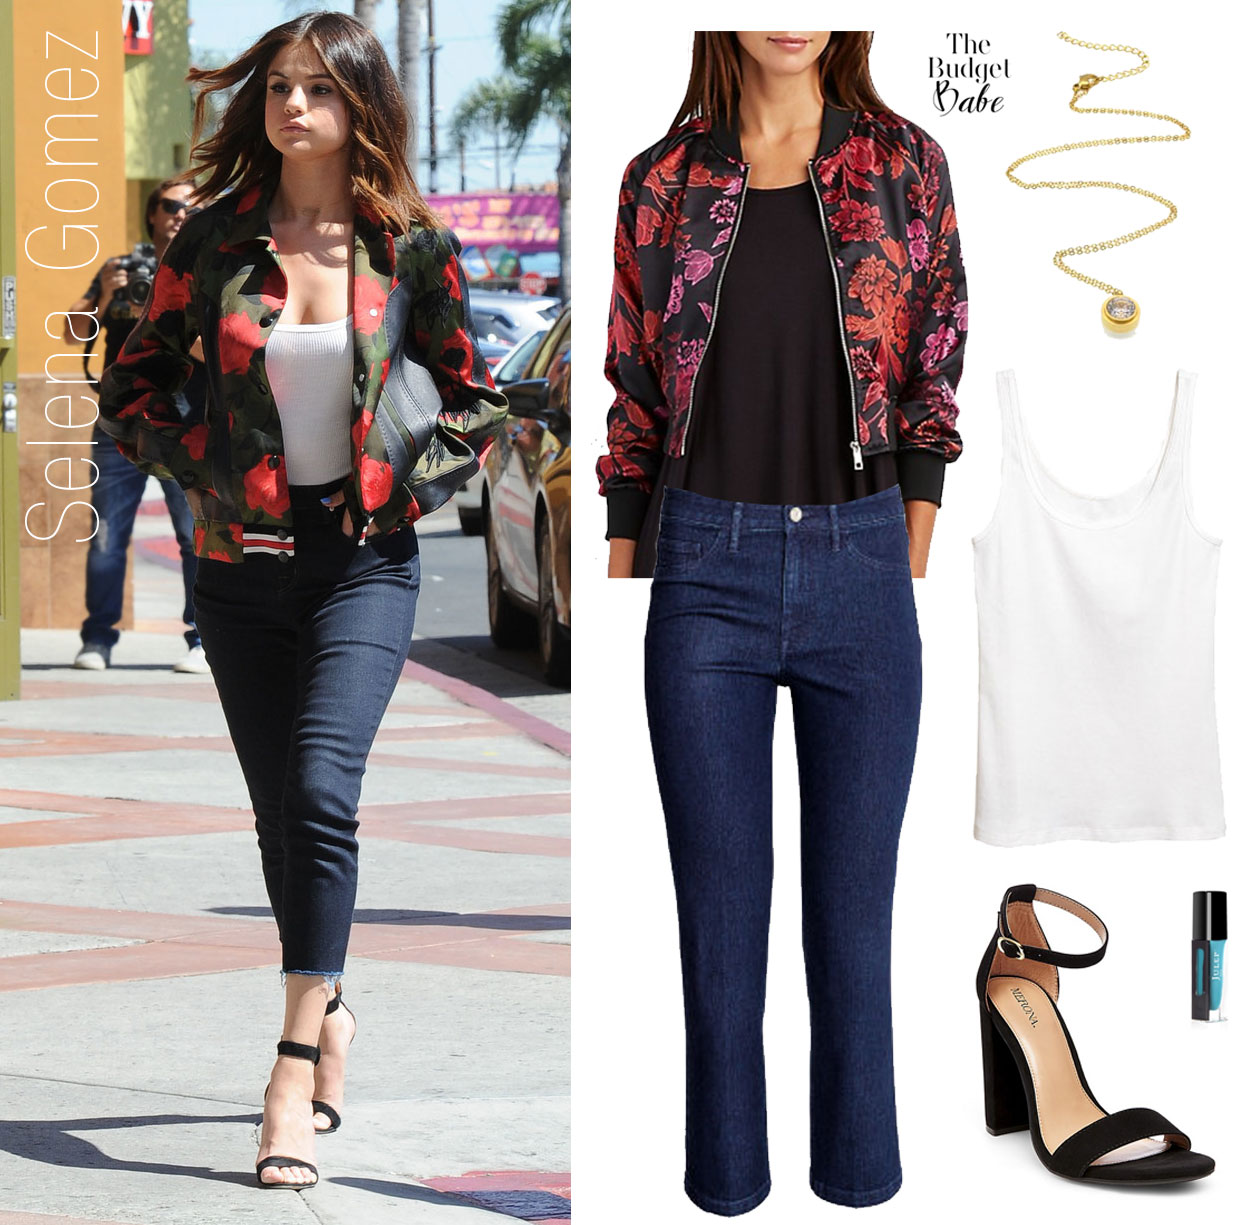 Selena Gomez slays in a red rose bomber jacket and skinny jeans.